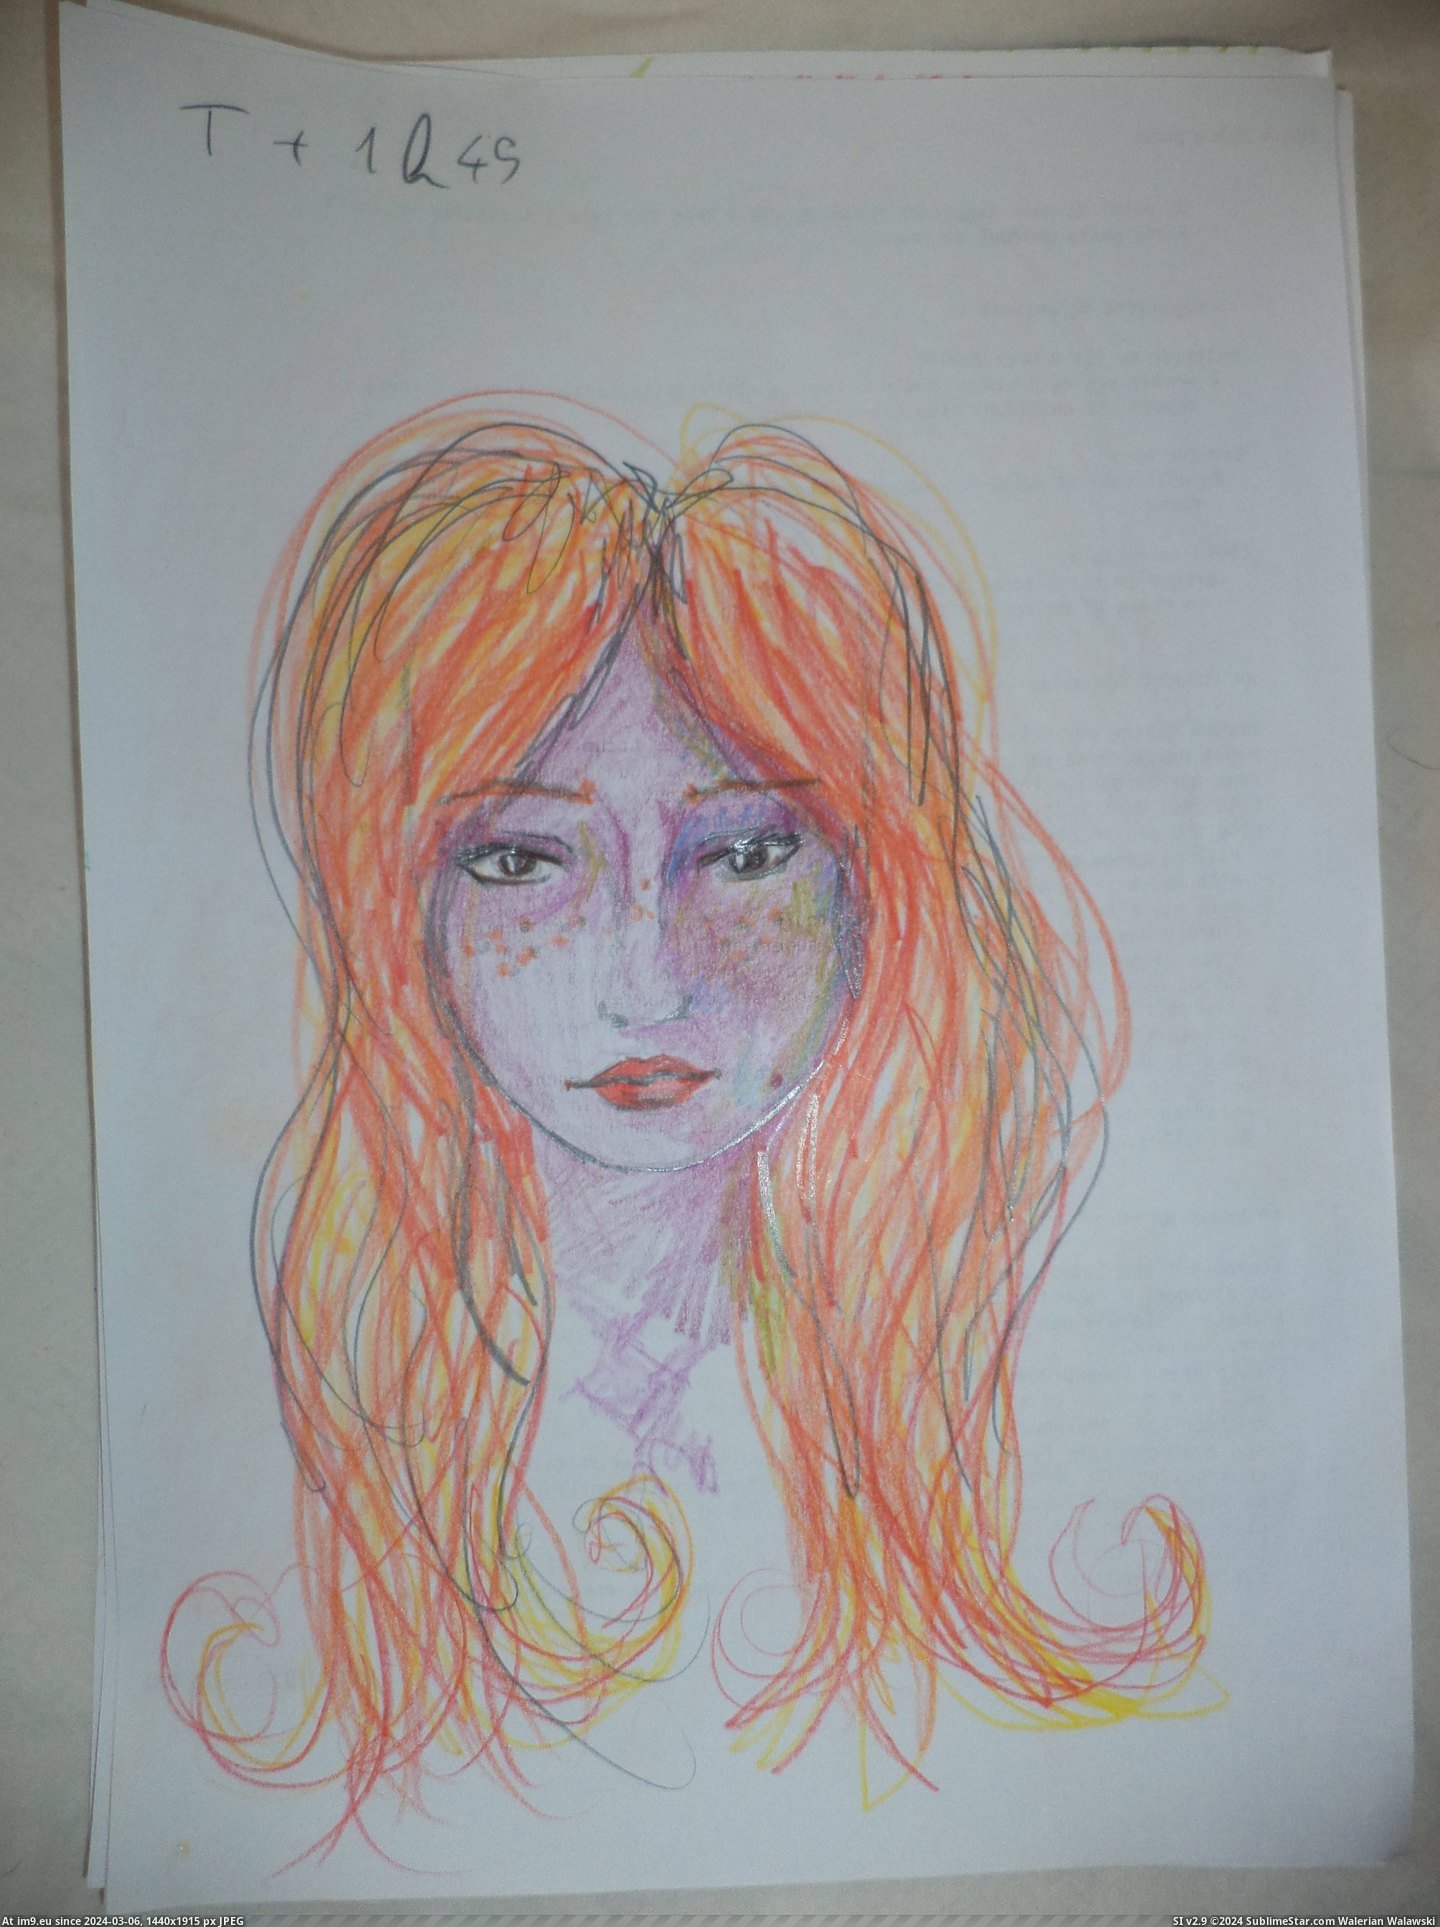 #Time #Friend #Portraits #Lsd #Trip #Drew [Pics] What a LSD trip looks like: a friend of mine drew 11 self-portraits during her first time. 10 Pic. (Изображение из альбом My r/PICS favs))